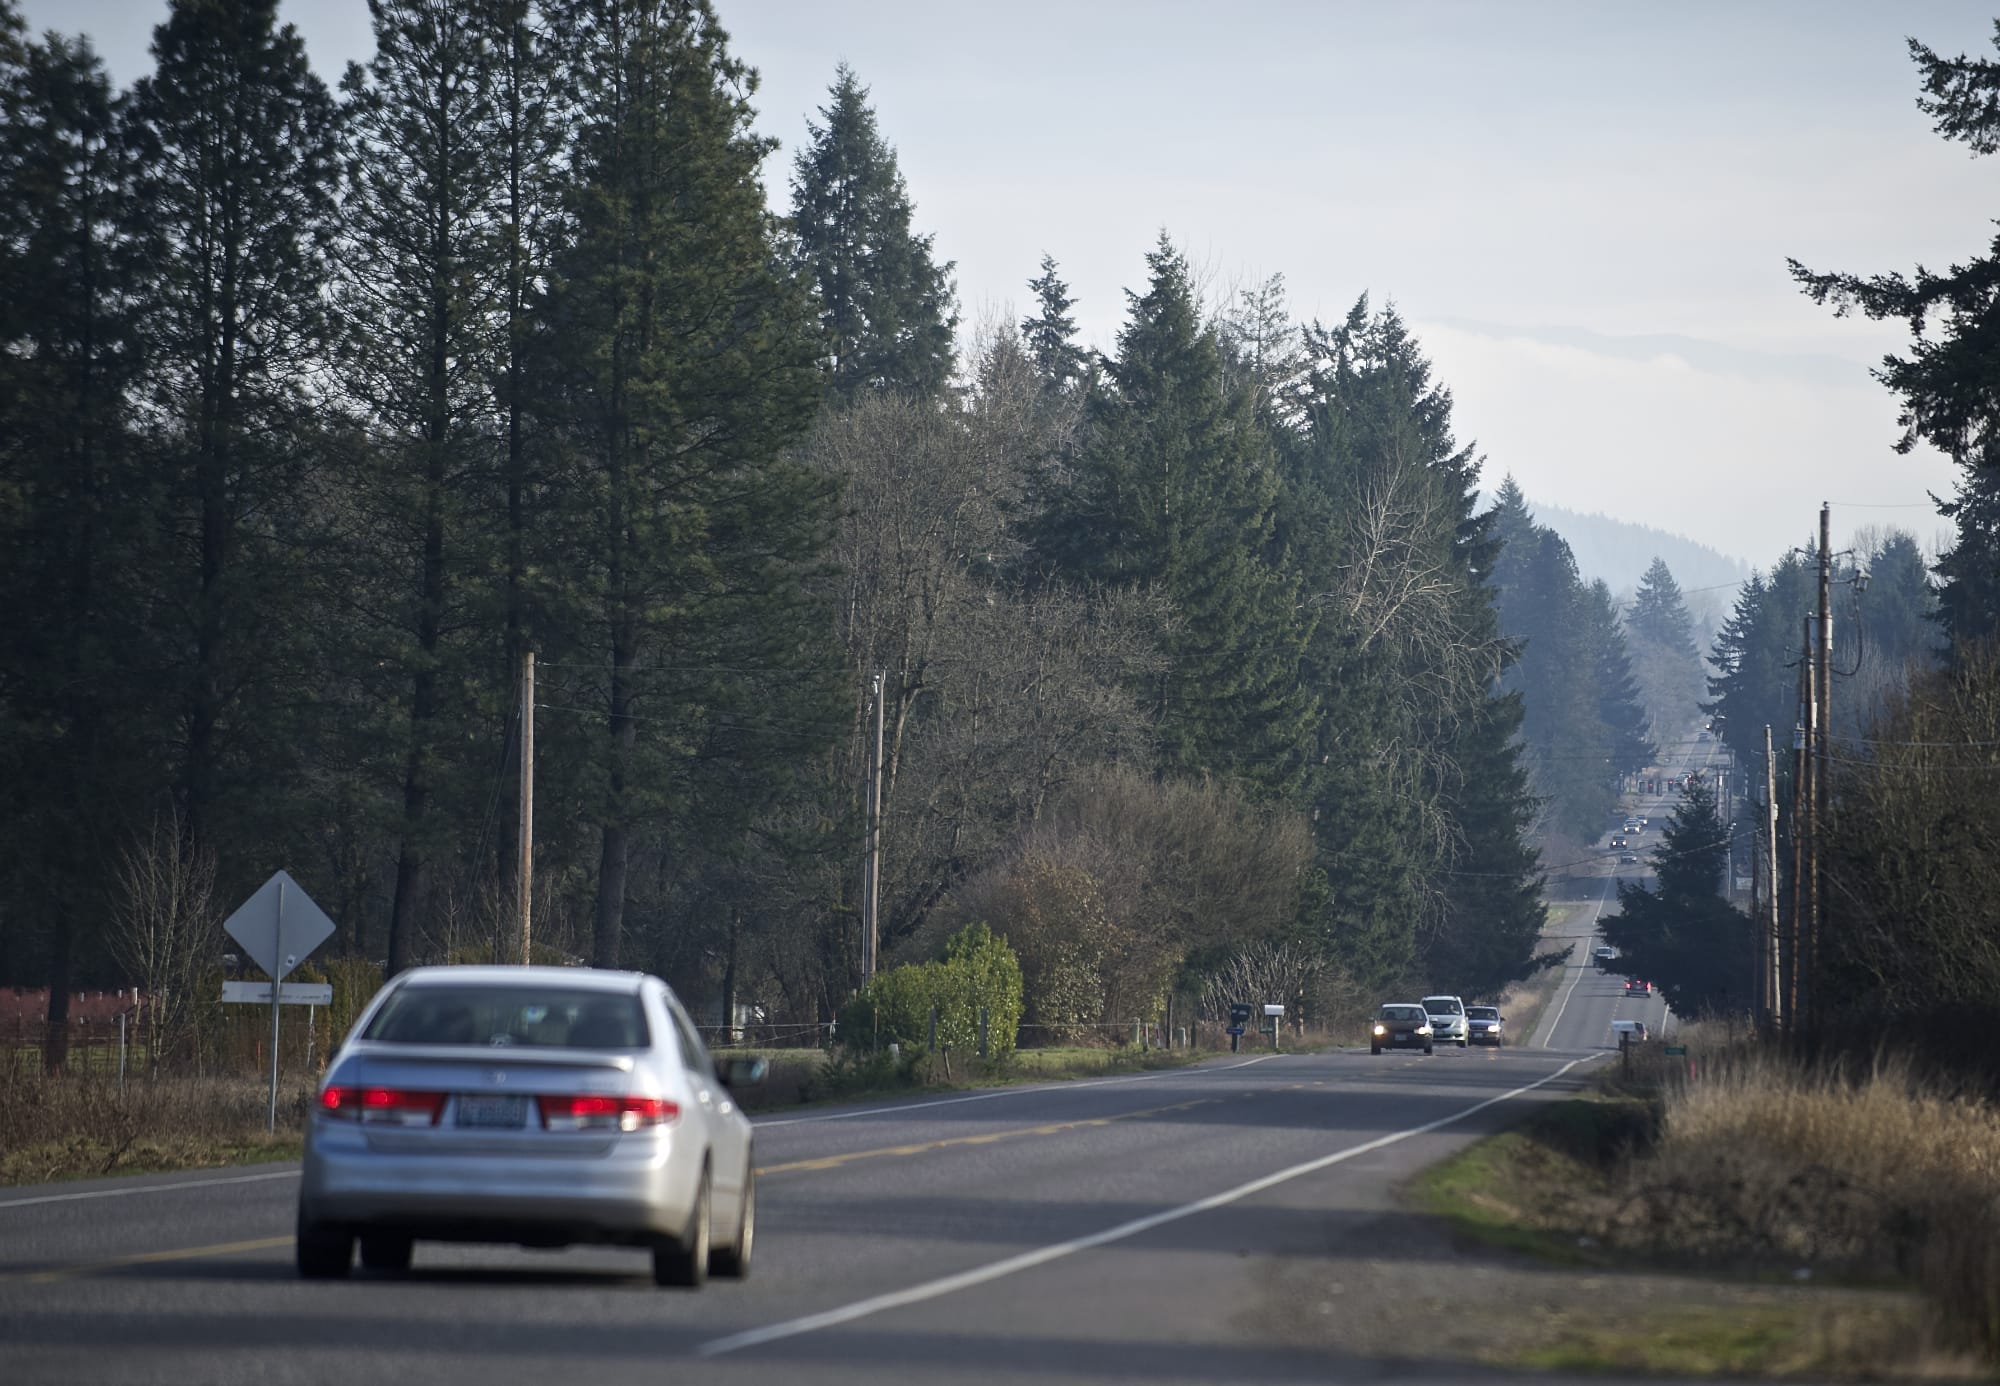 A project to widen part of Highway 502 between I-5 and Battle Ground was among the projects that made the cut in the Senate transportation proposal.